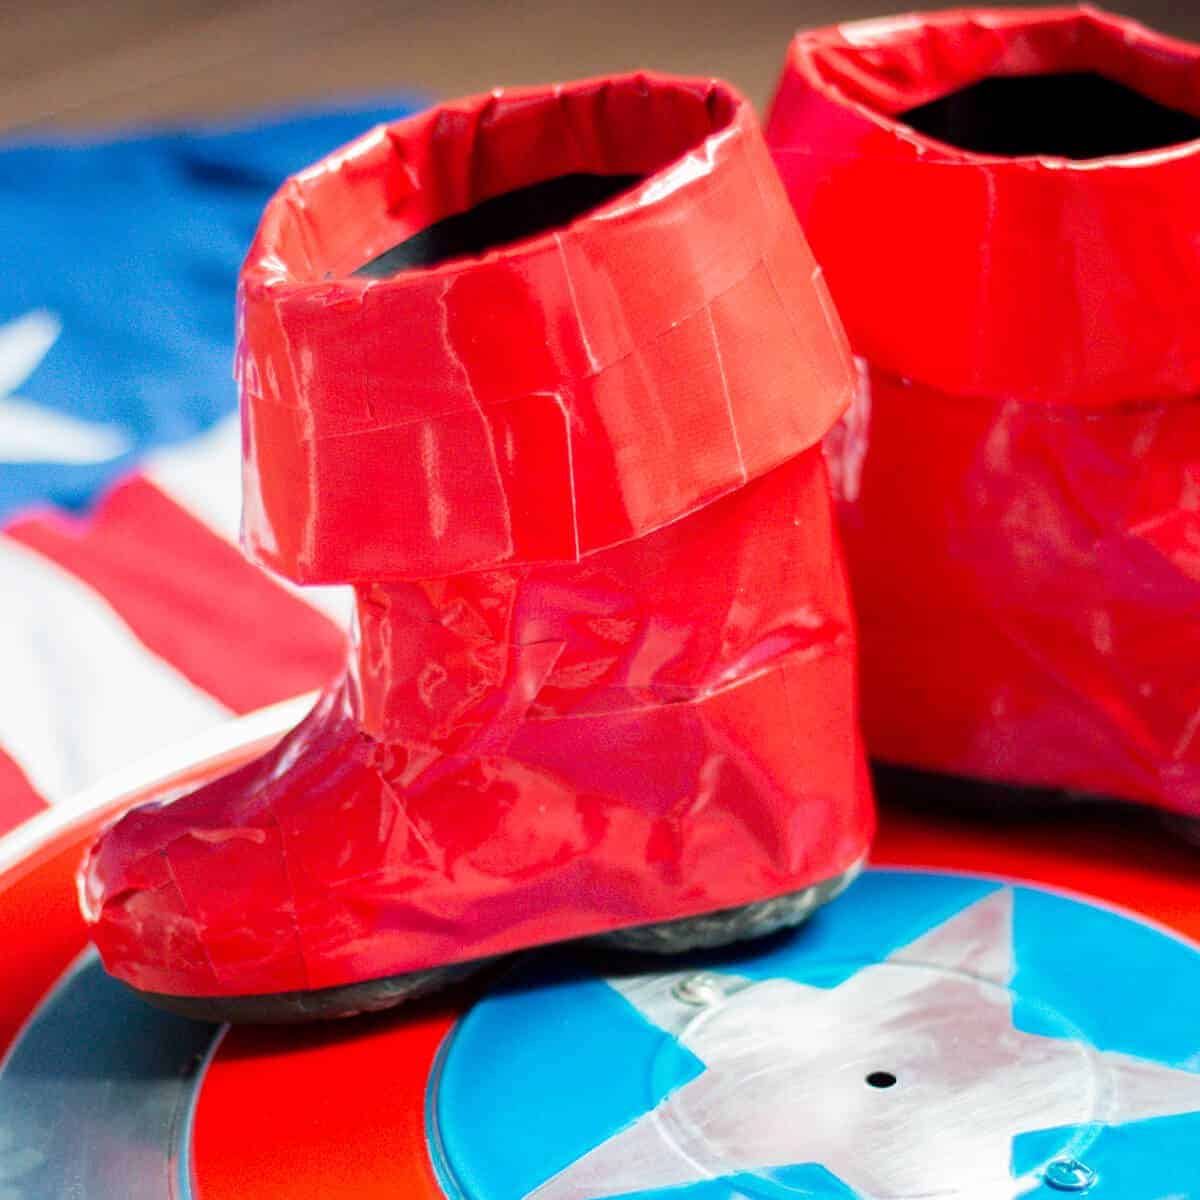 Homemade Captain America Boots made from duct tape on a homemade Captain America shield